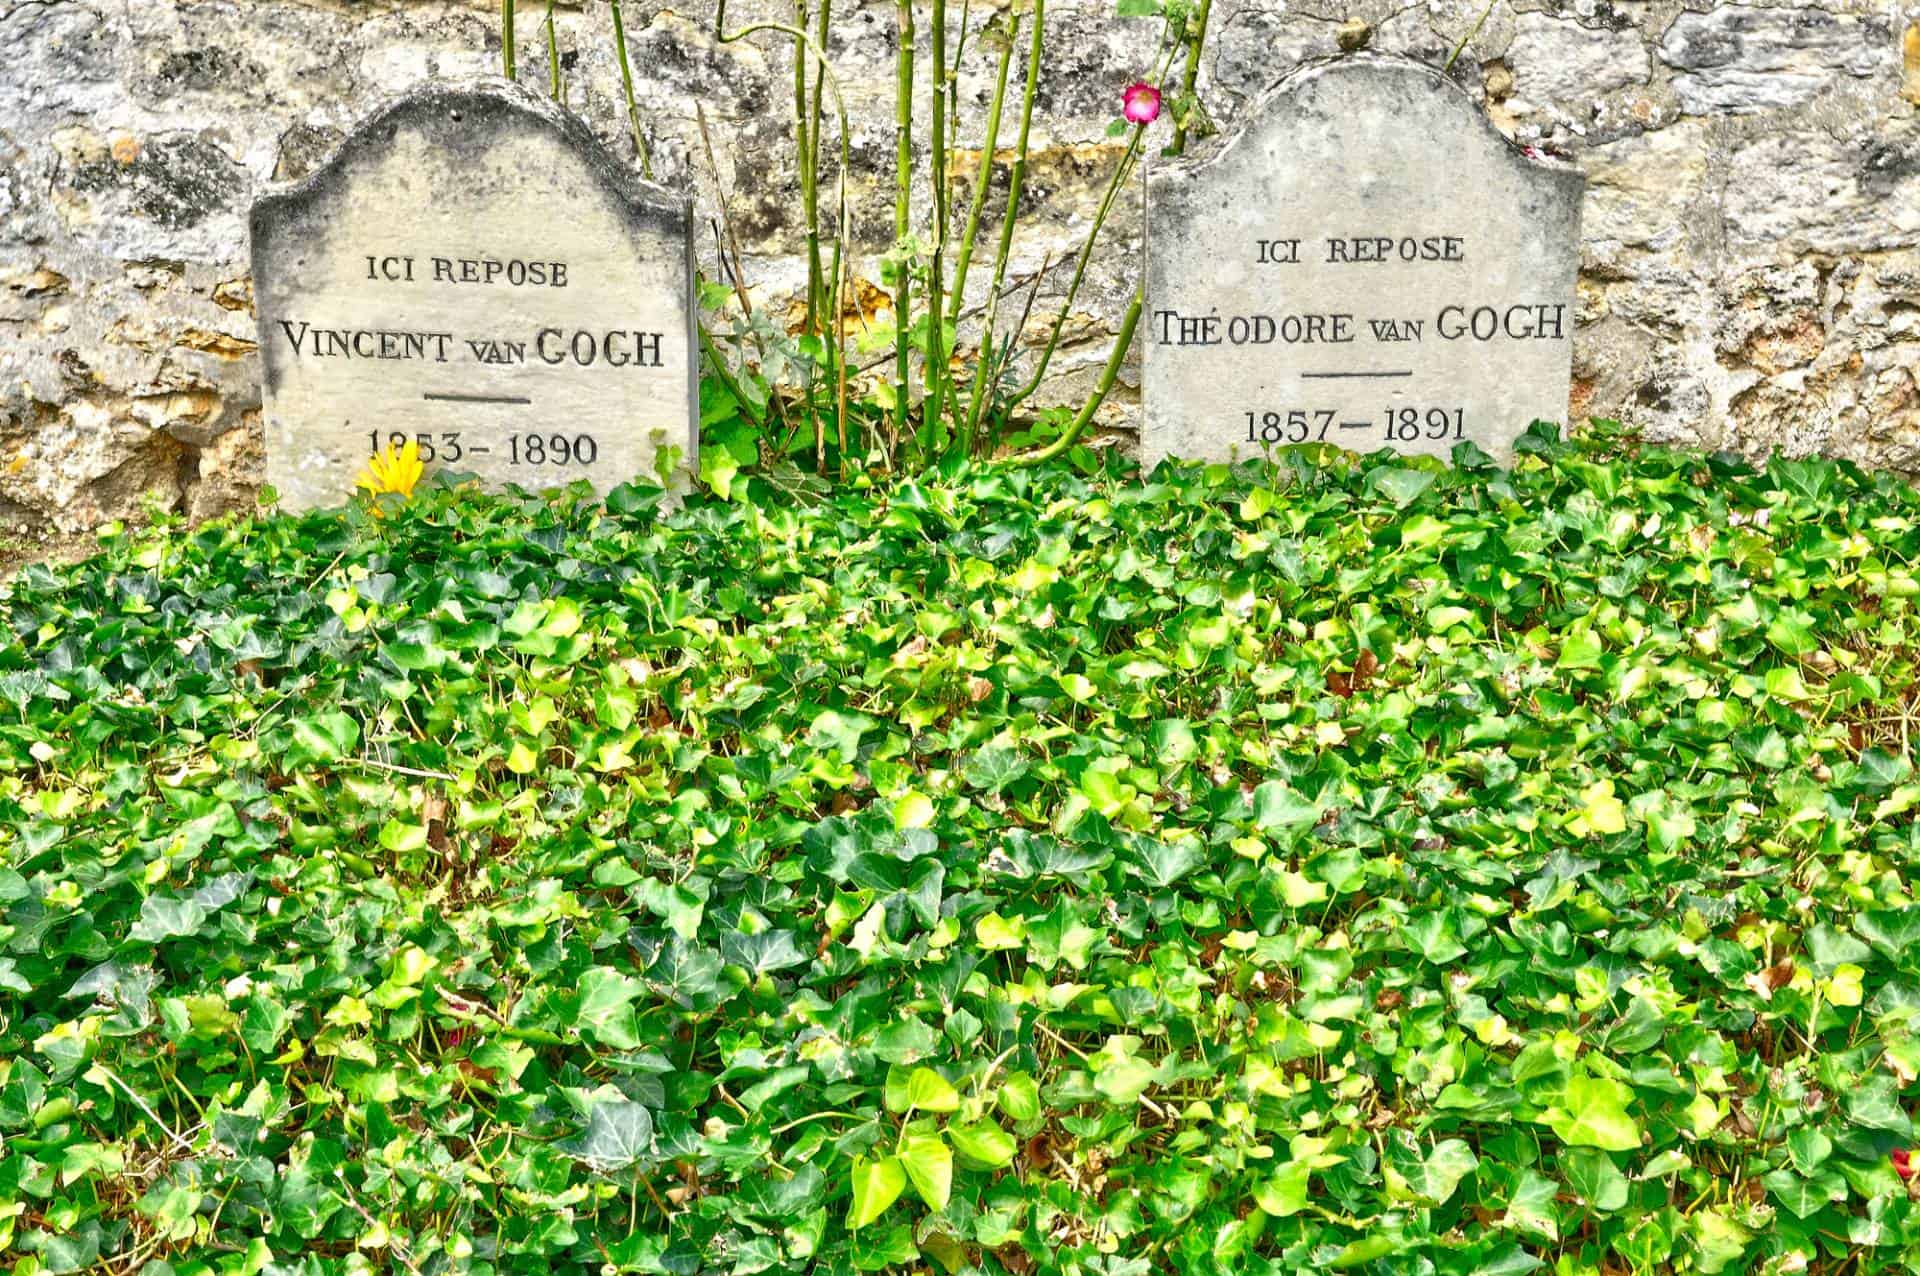 Where are the famous artists now buried?